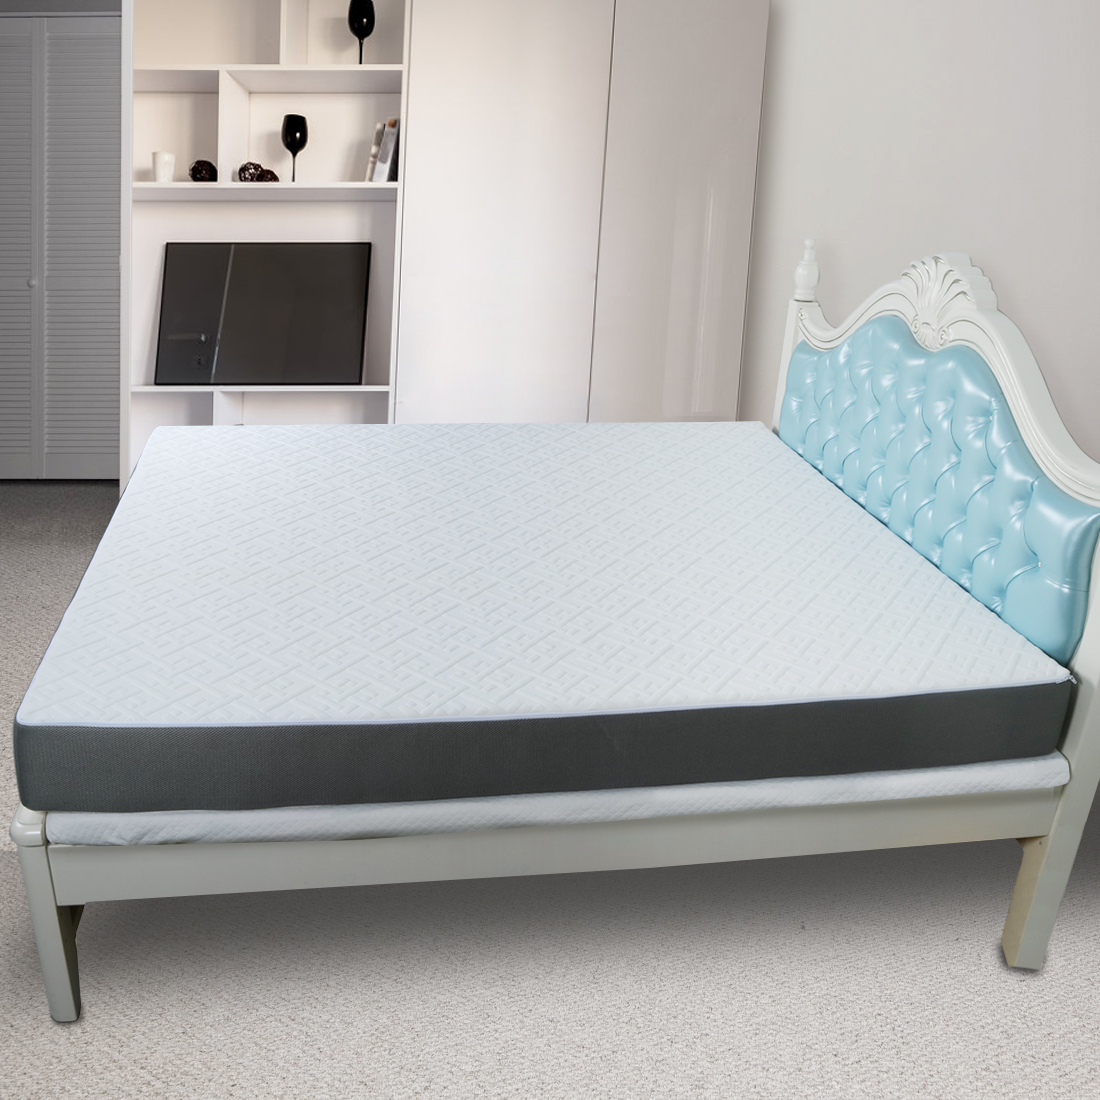 Whole net spring and independent spring mattress which is better